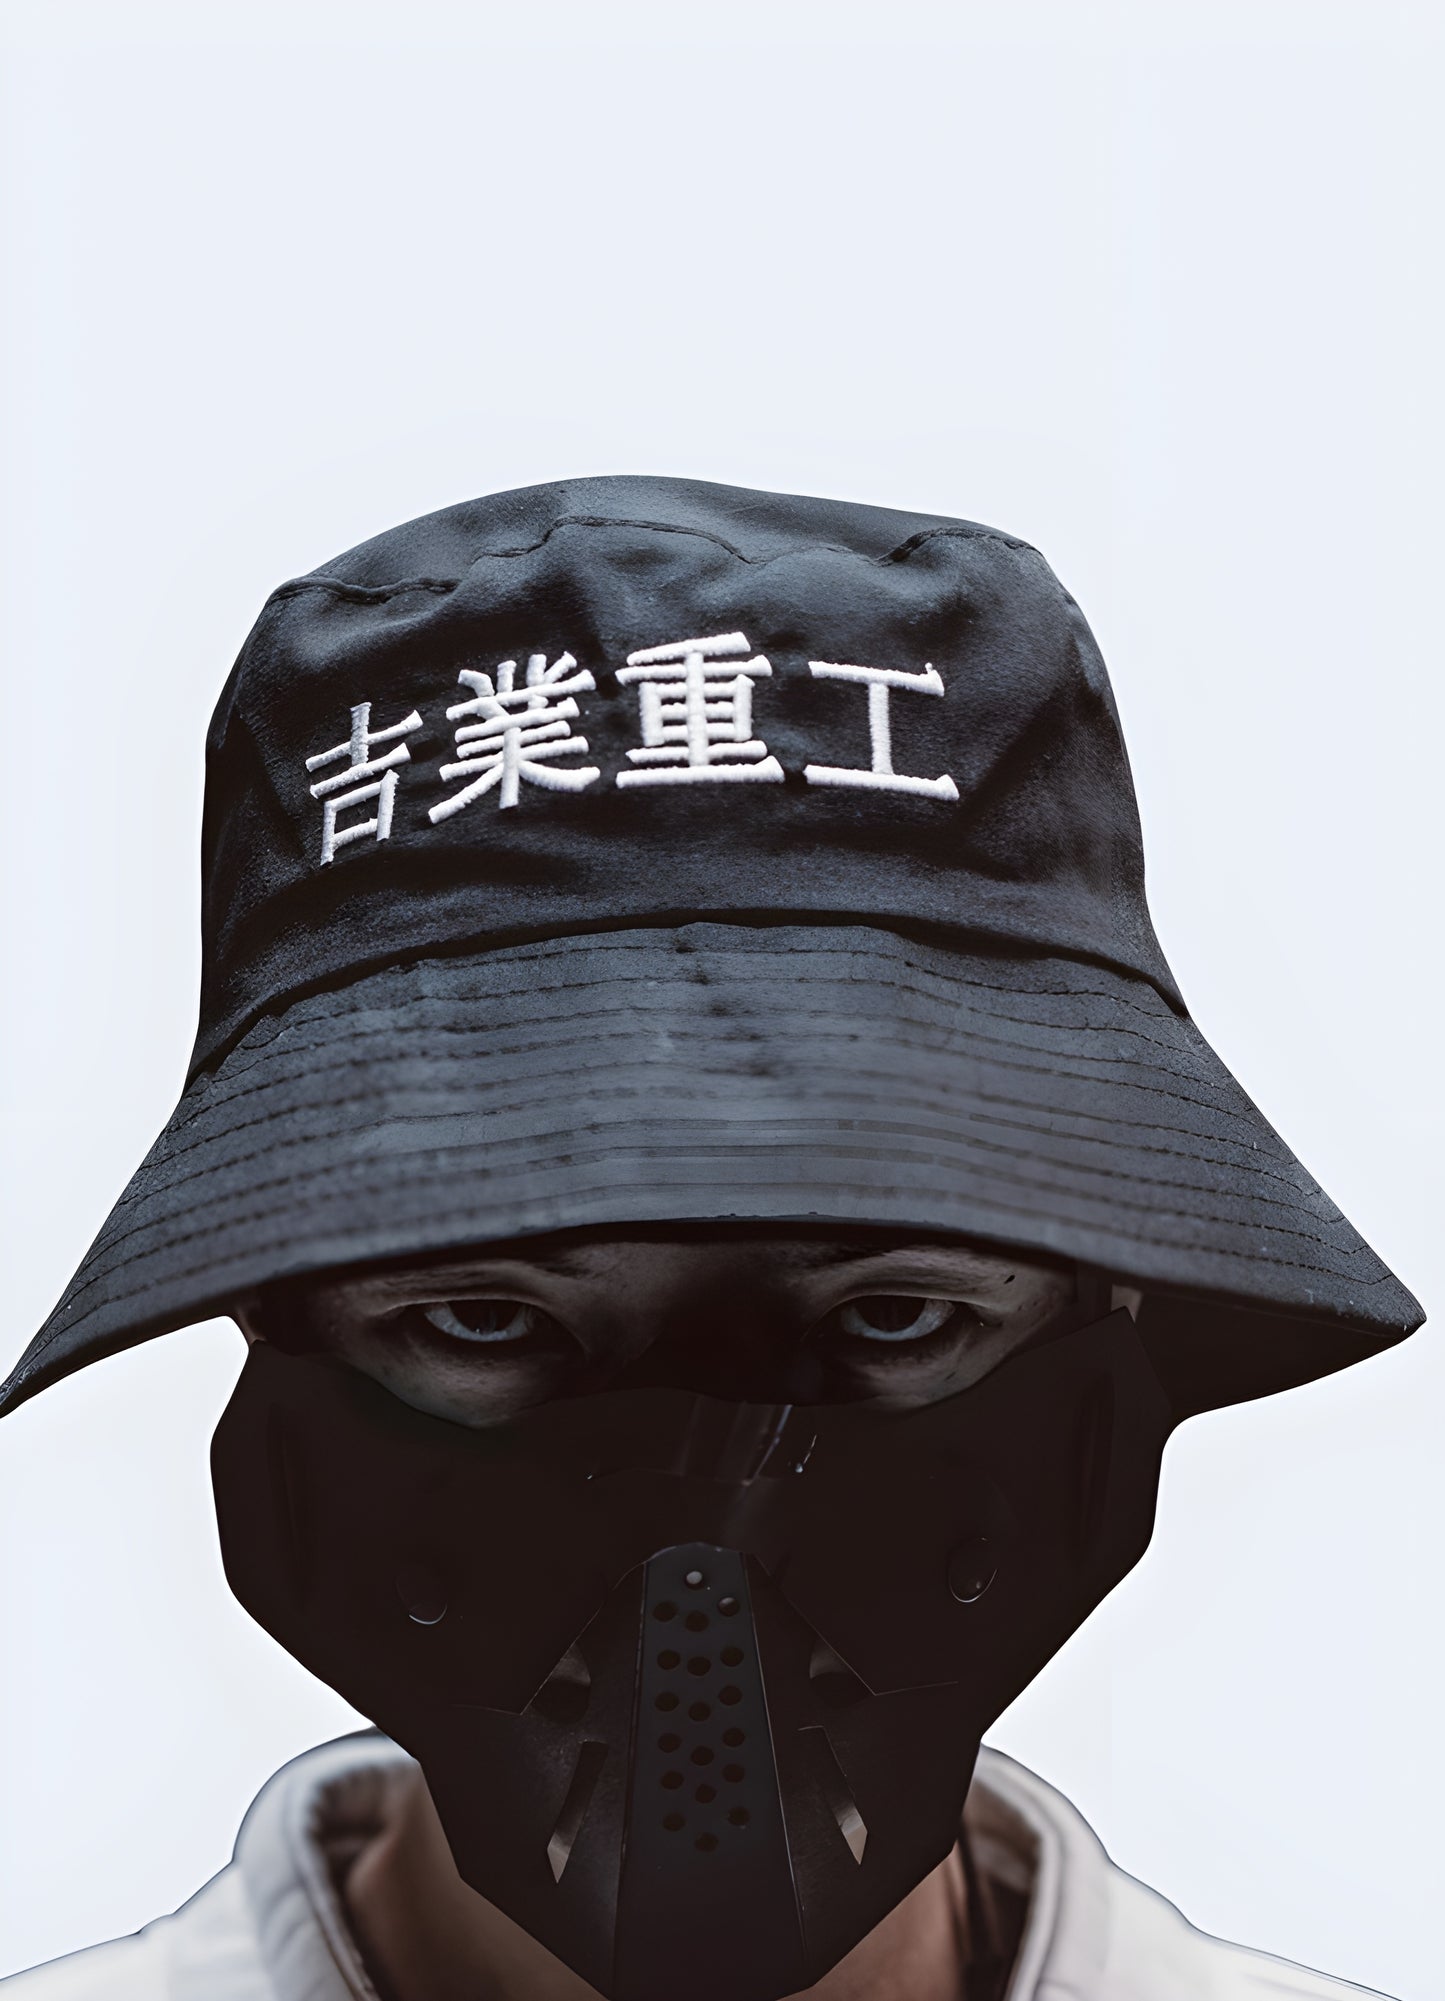 At first glance, the pristine white Kanji lettering that graces the front of the hat reveals its true identity.